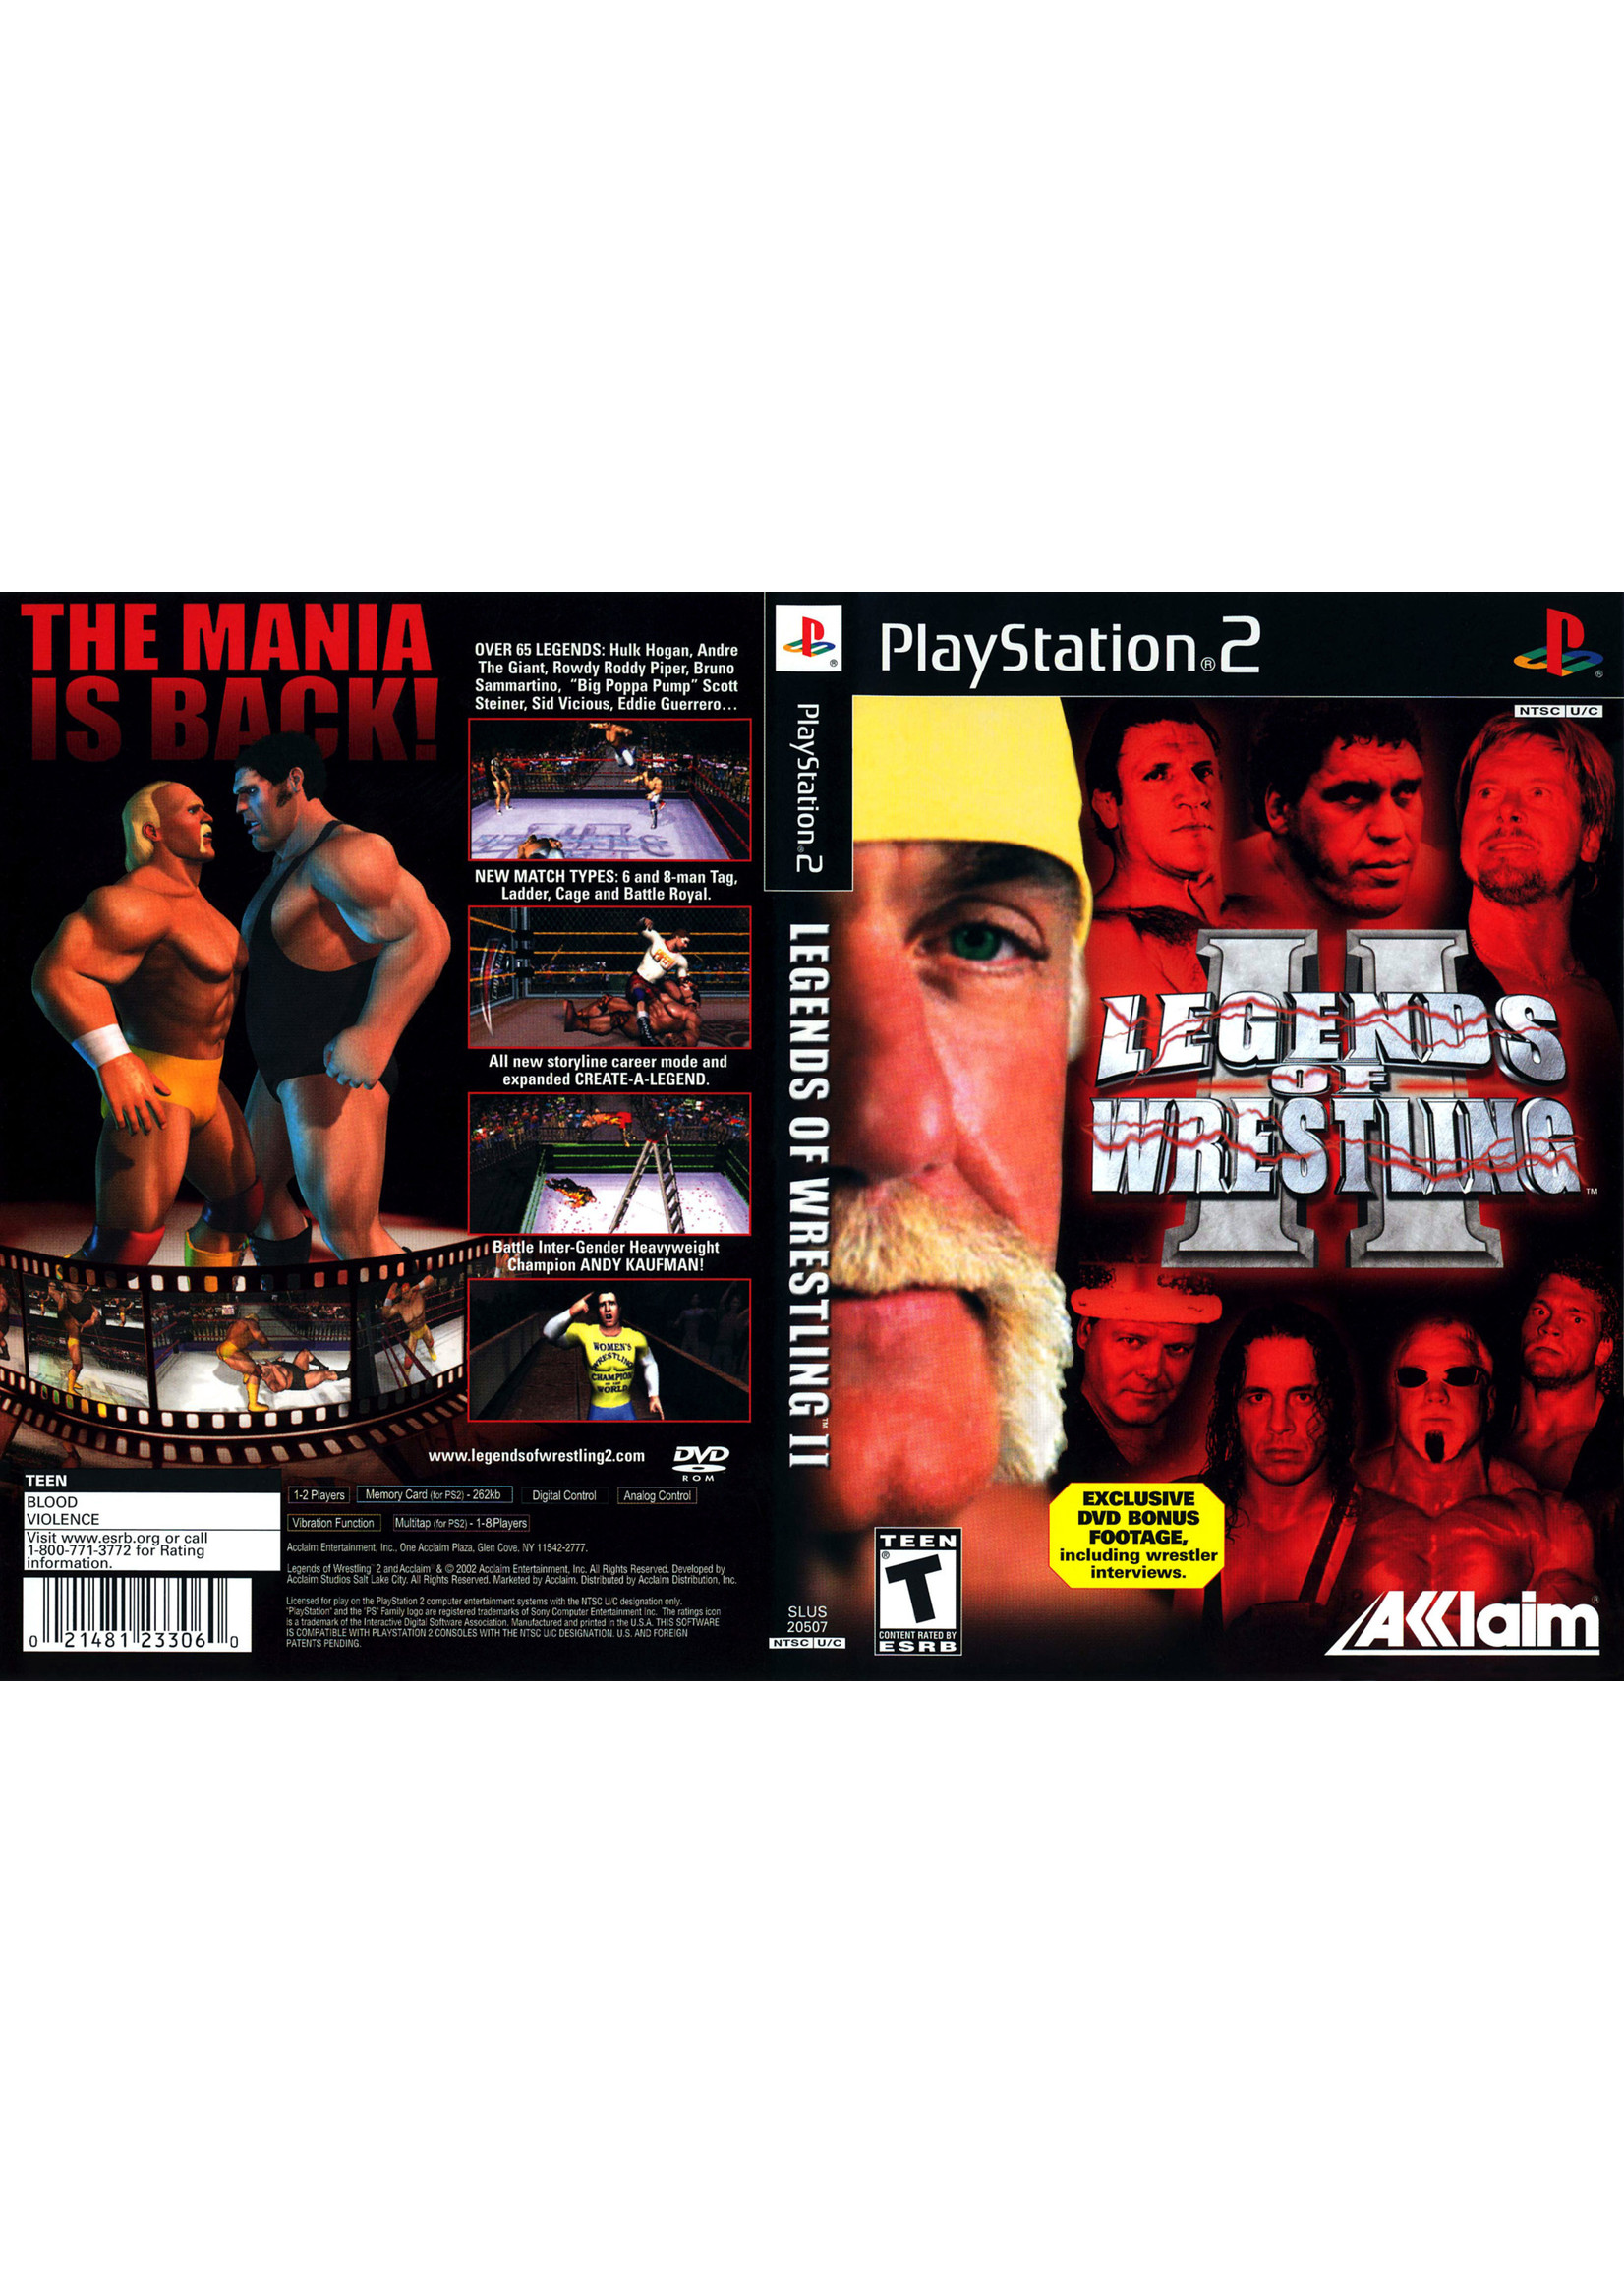 Sony Playstation 2 (PS2) Legends of Wrestling II